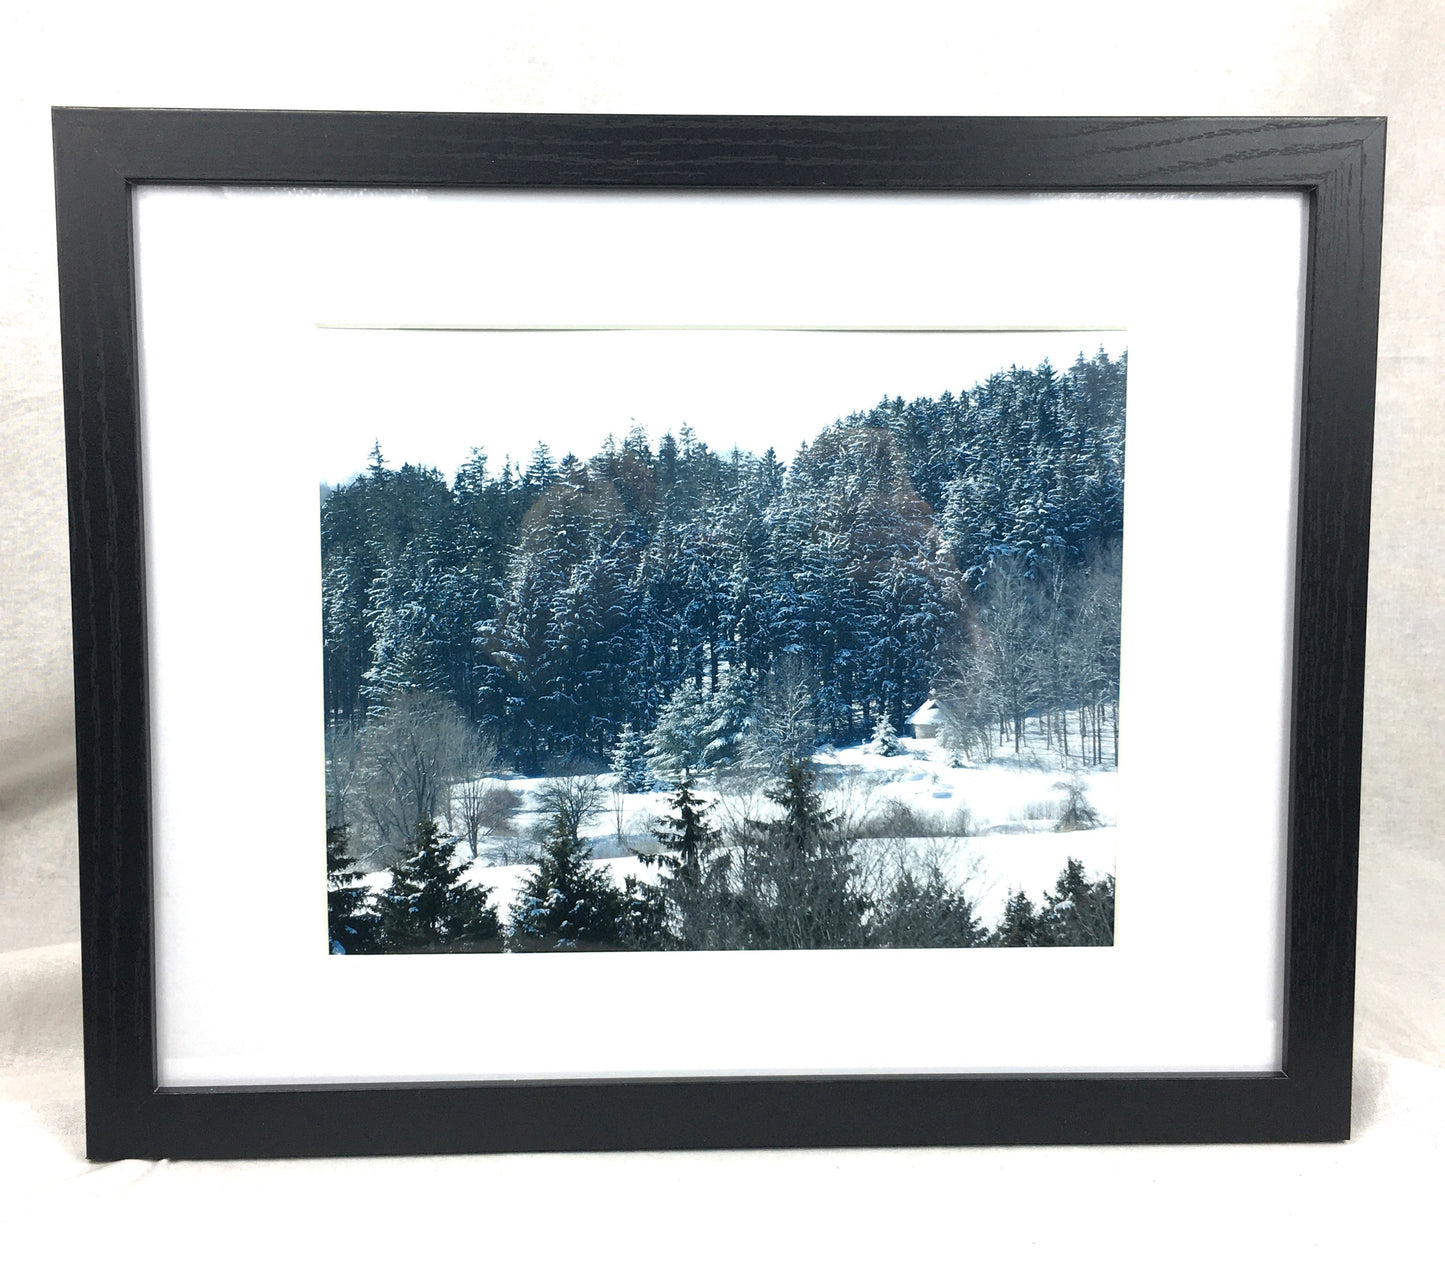 Chapel in the Snowy Woods - Framed Photo